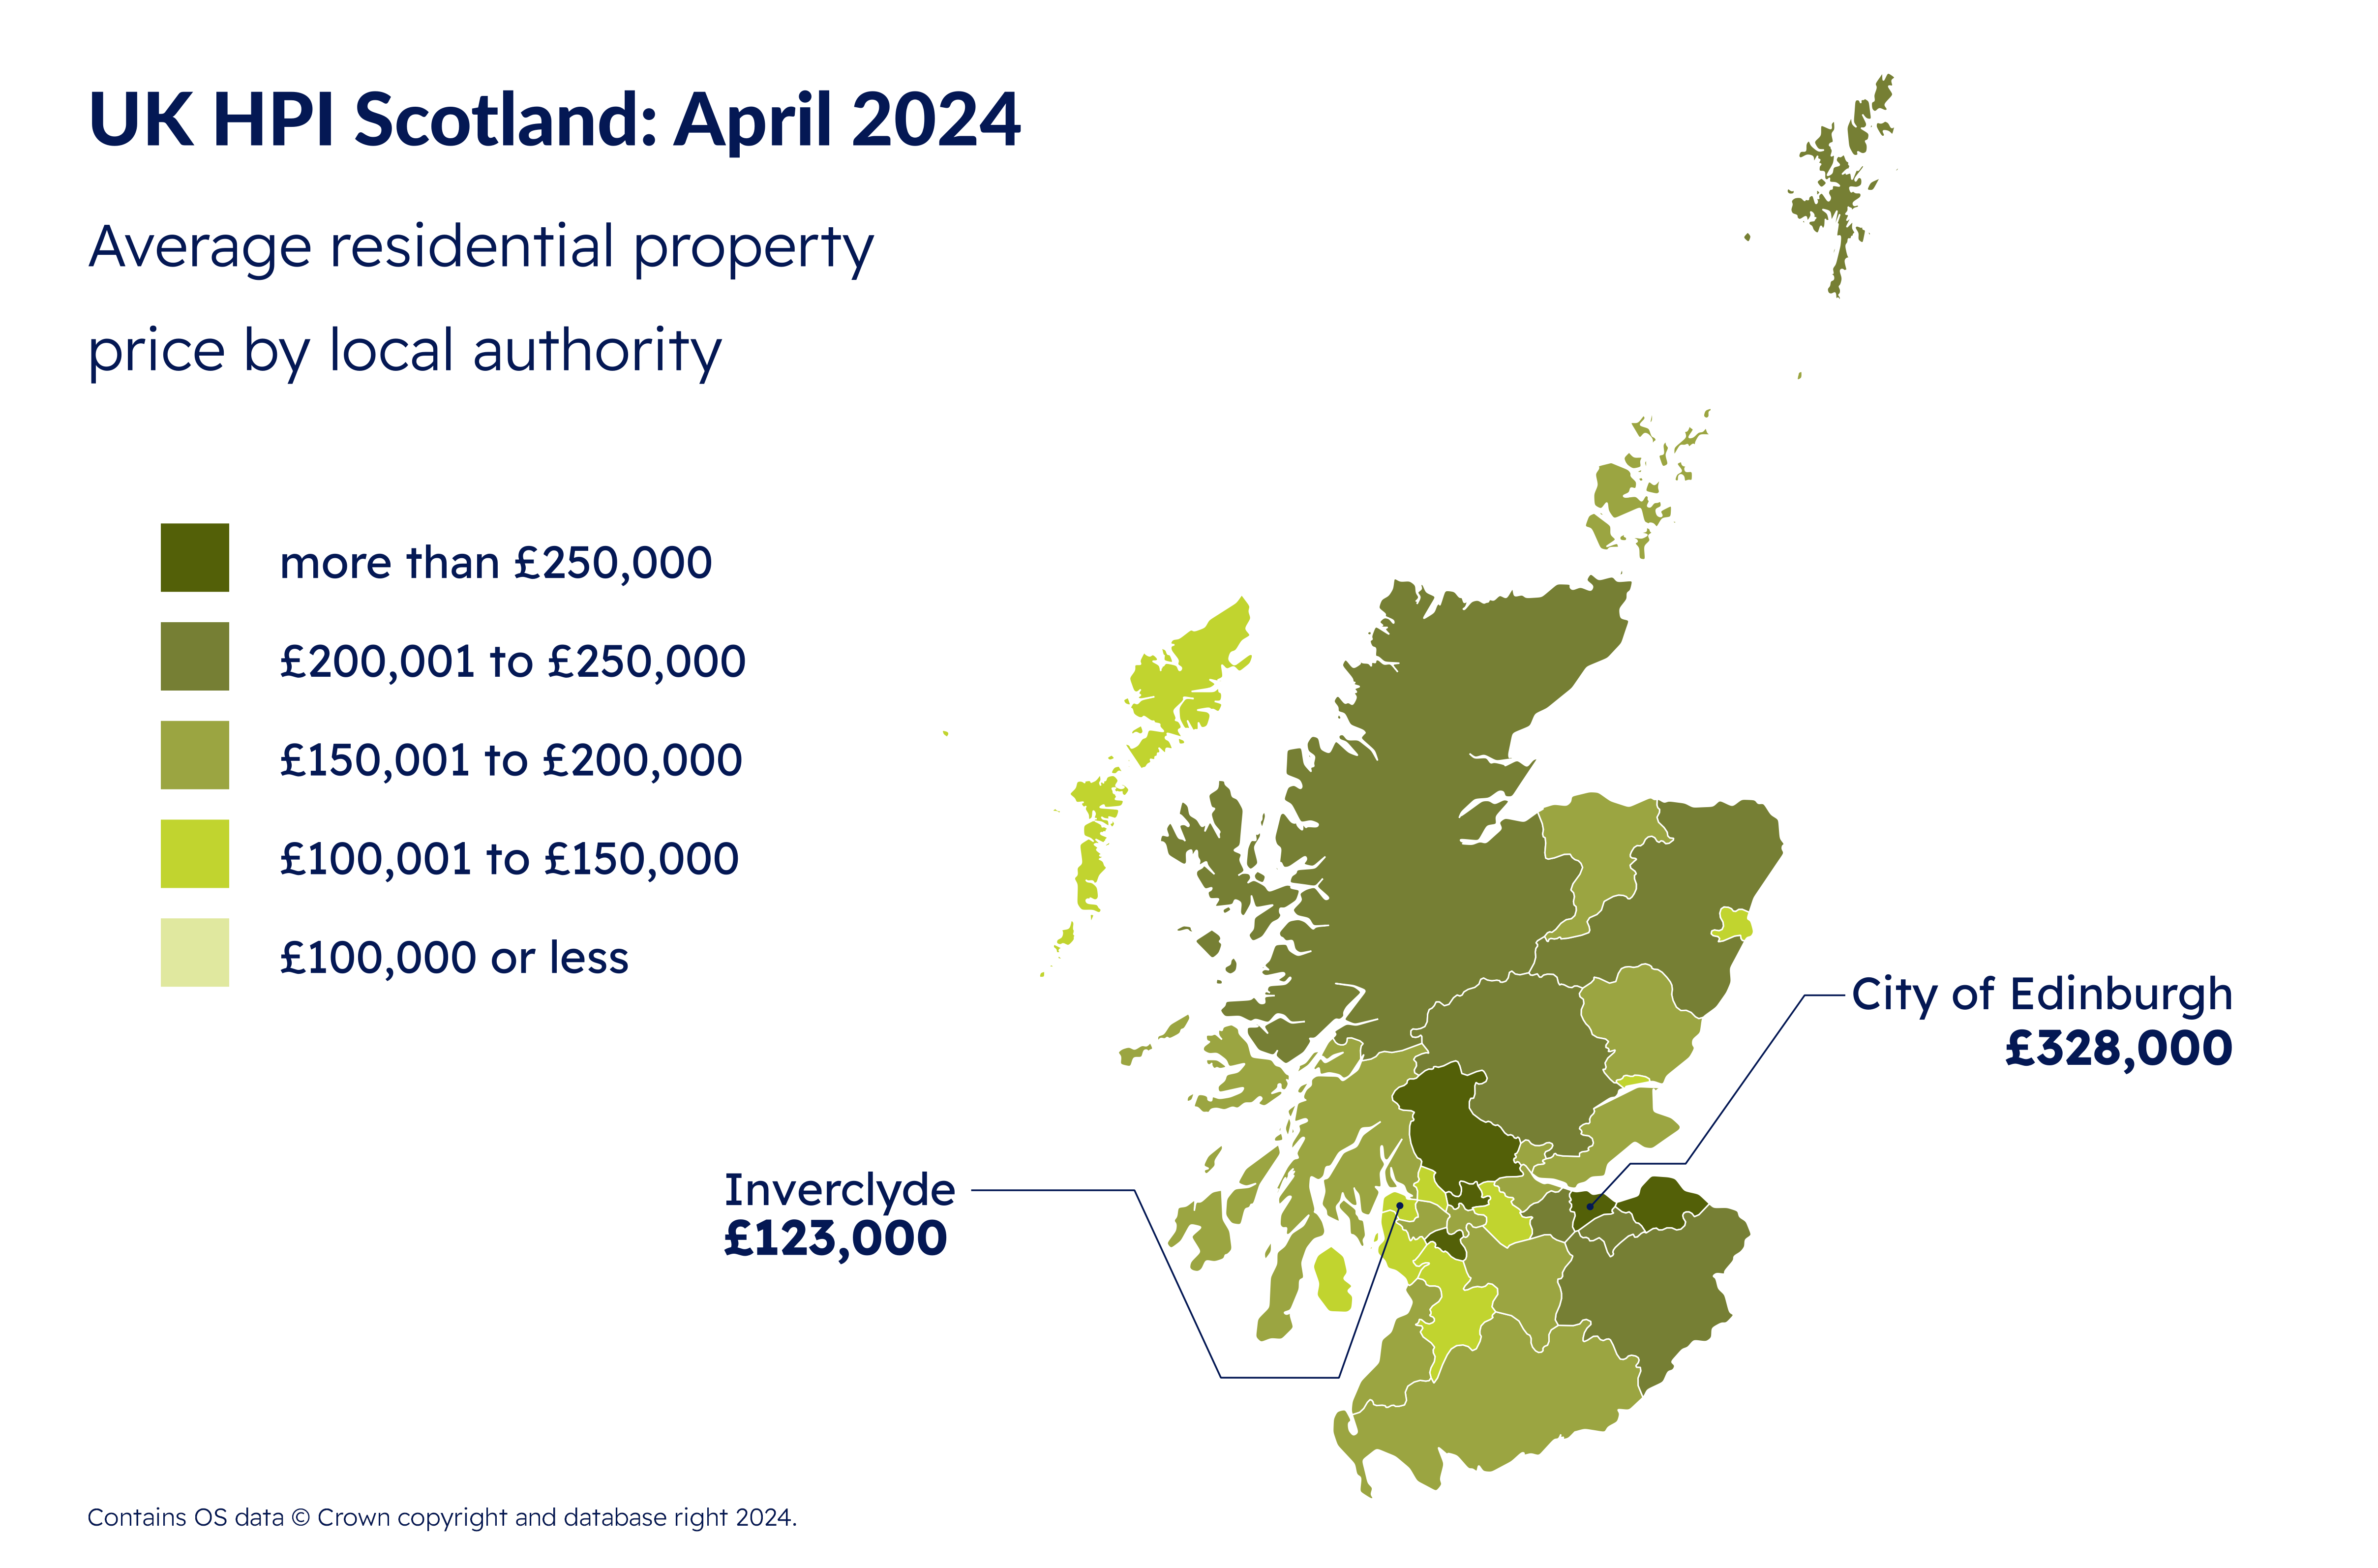 RoS: Scottish property market heats up as prices and sales rise